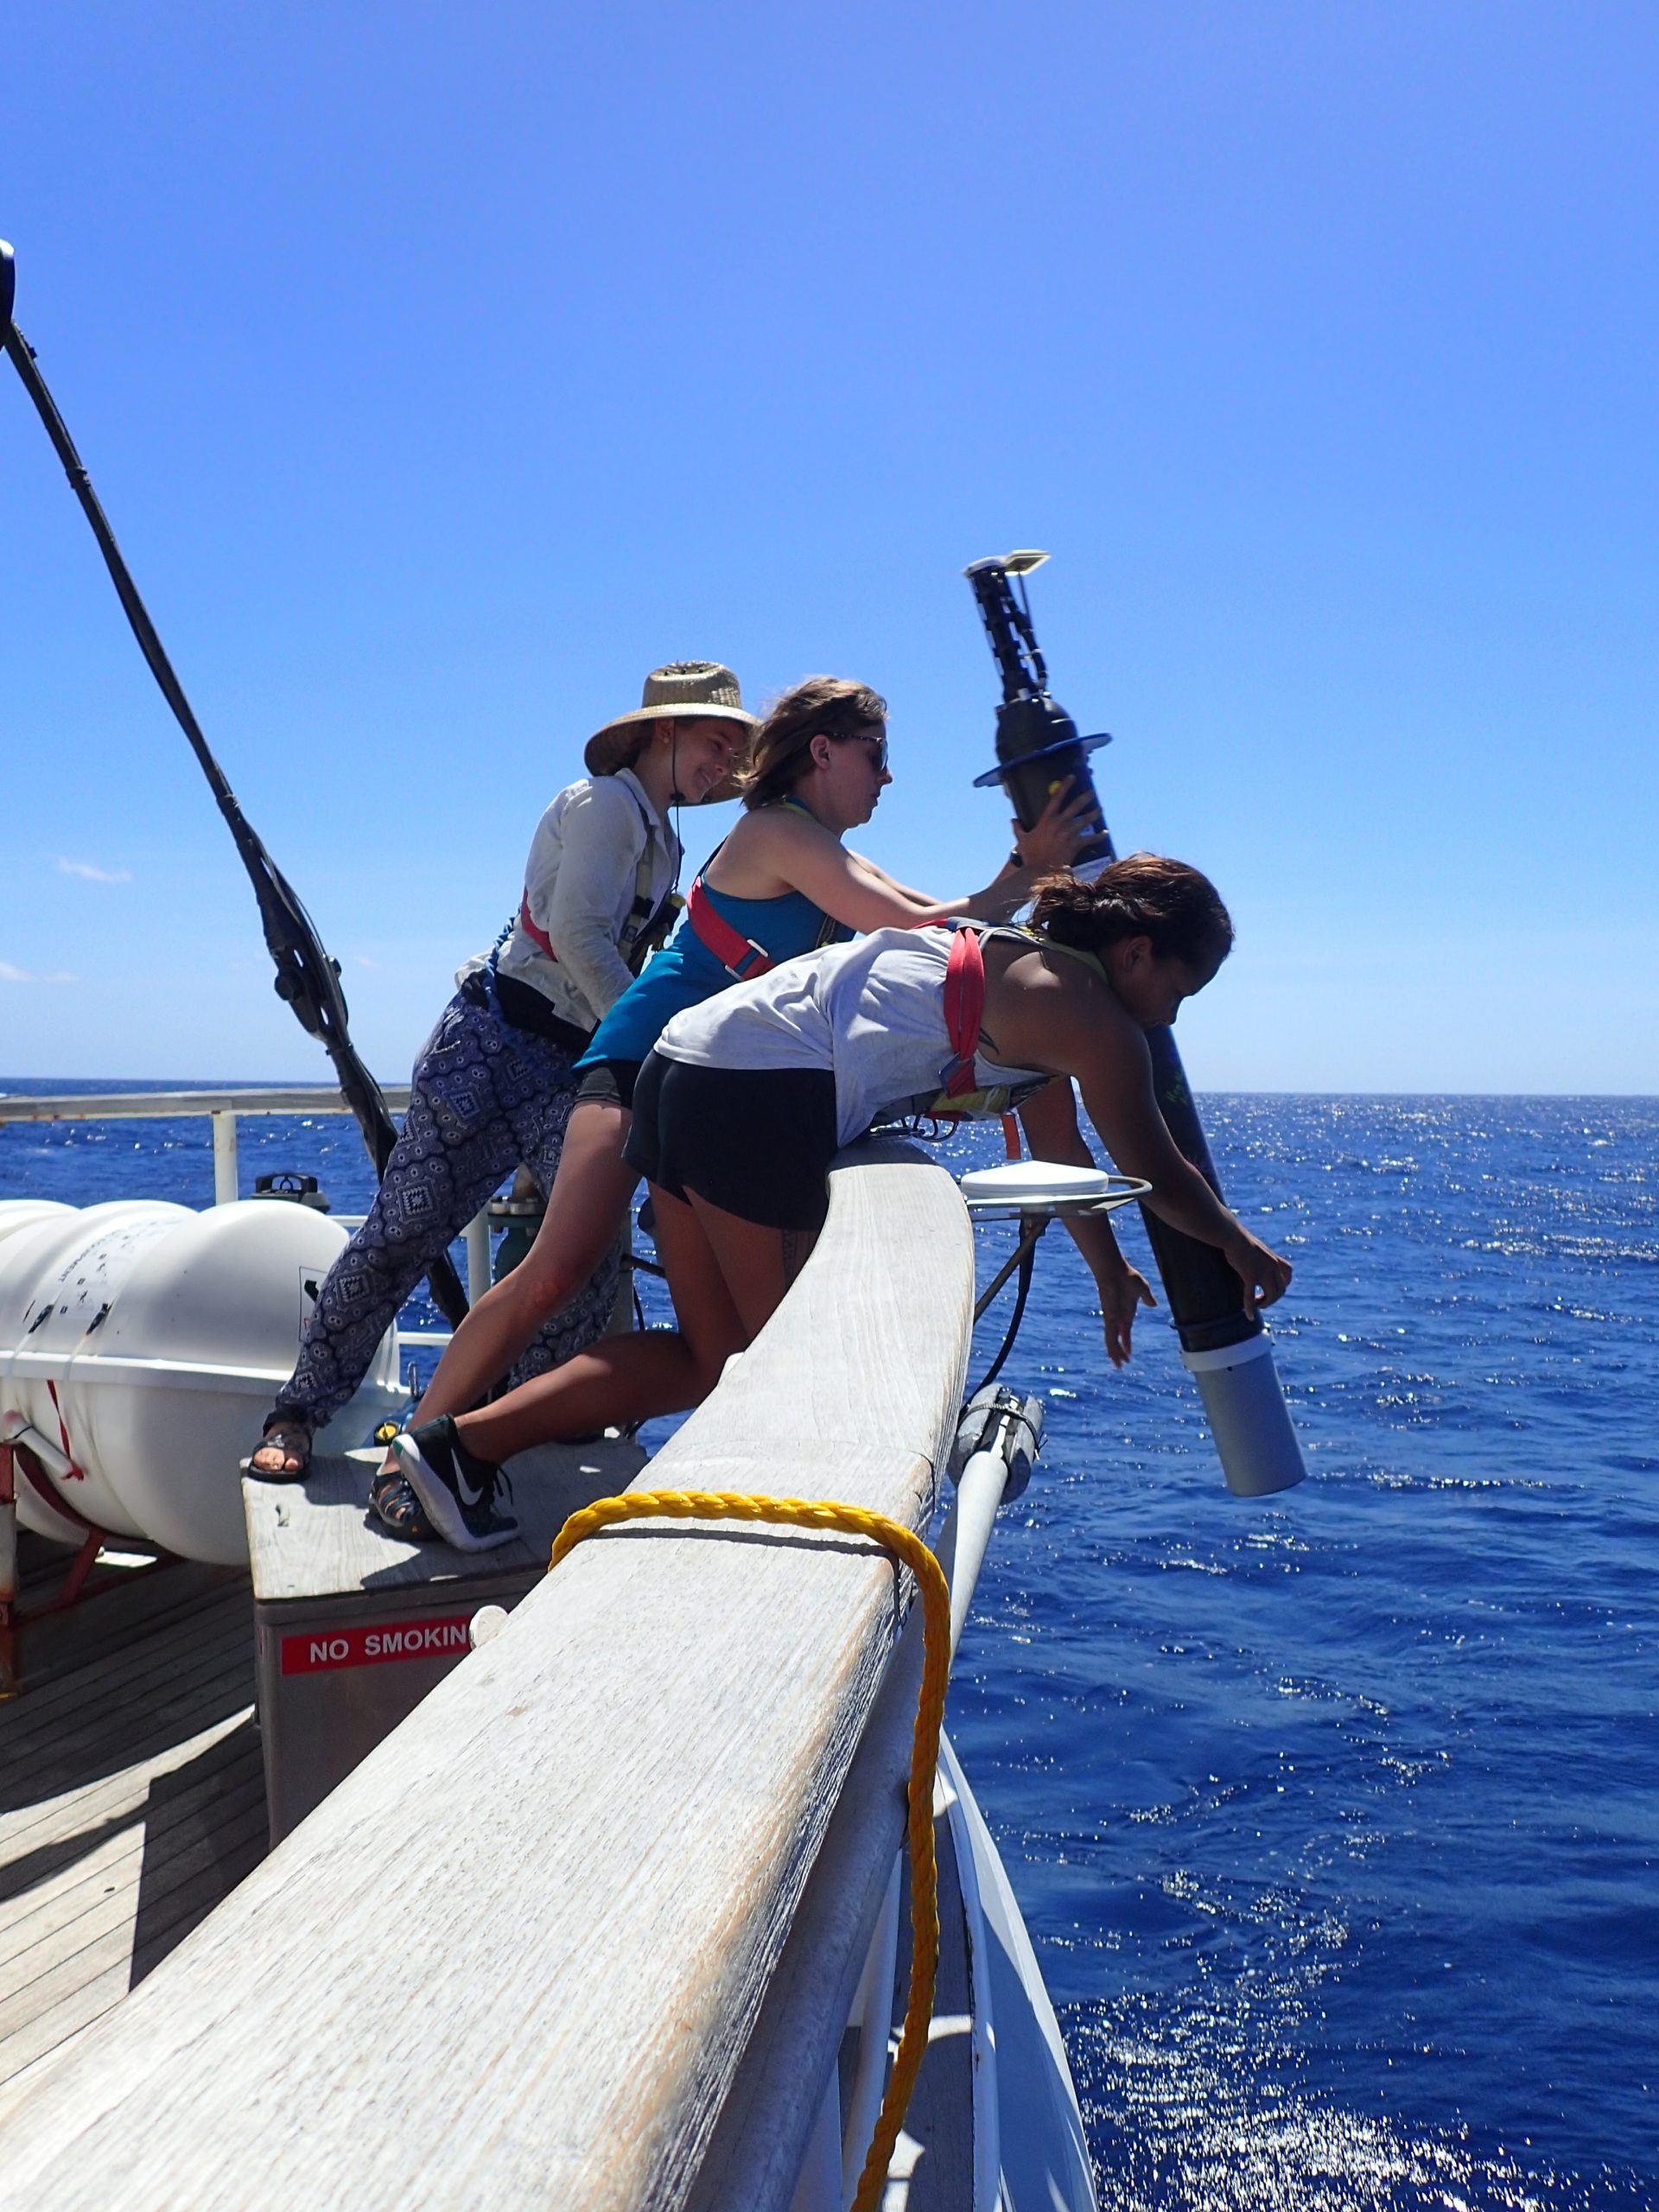 ASCC Student Intern Deploying Instrument In The Ocean.